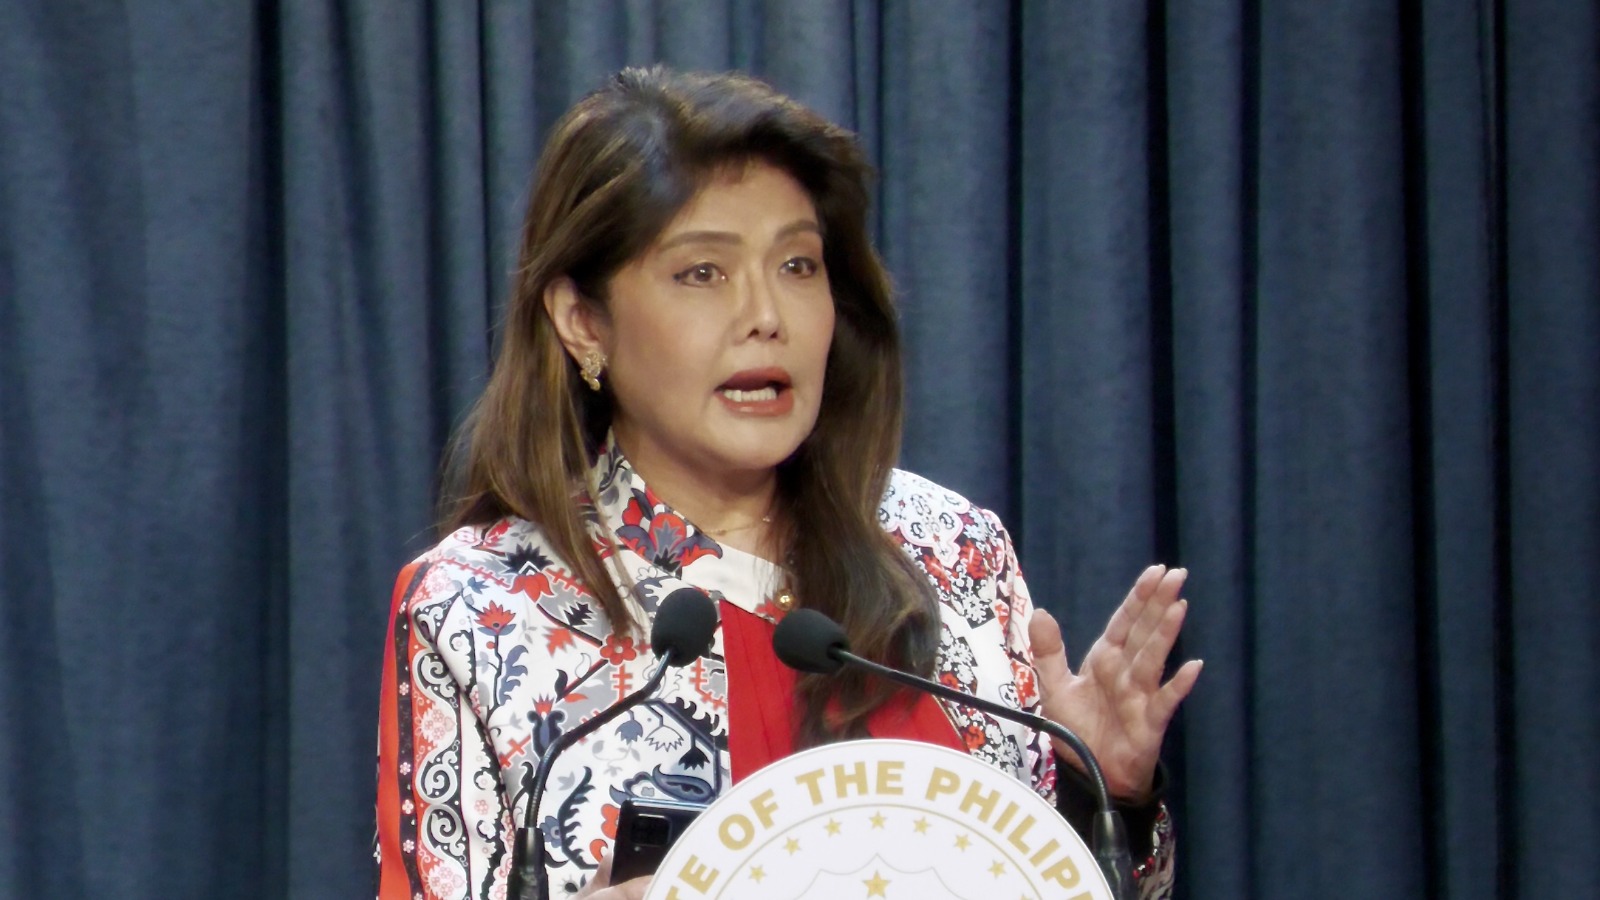 Imee Marcos calls for 'urgent' probe into El Niño's ill-effects